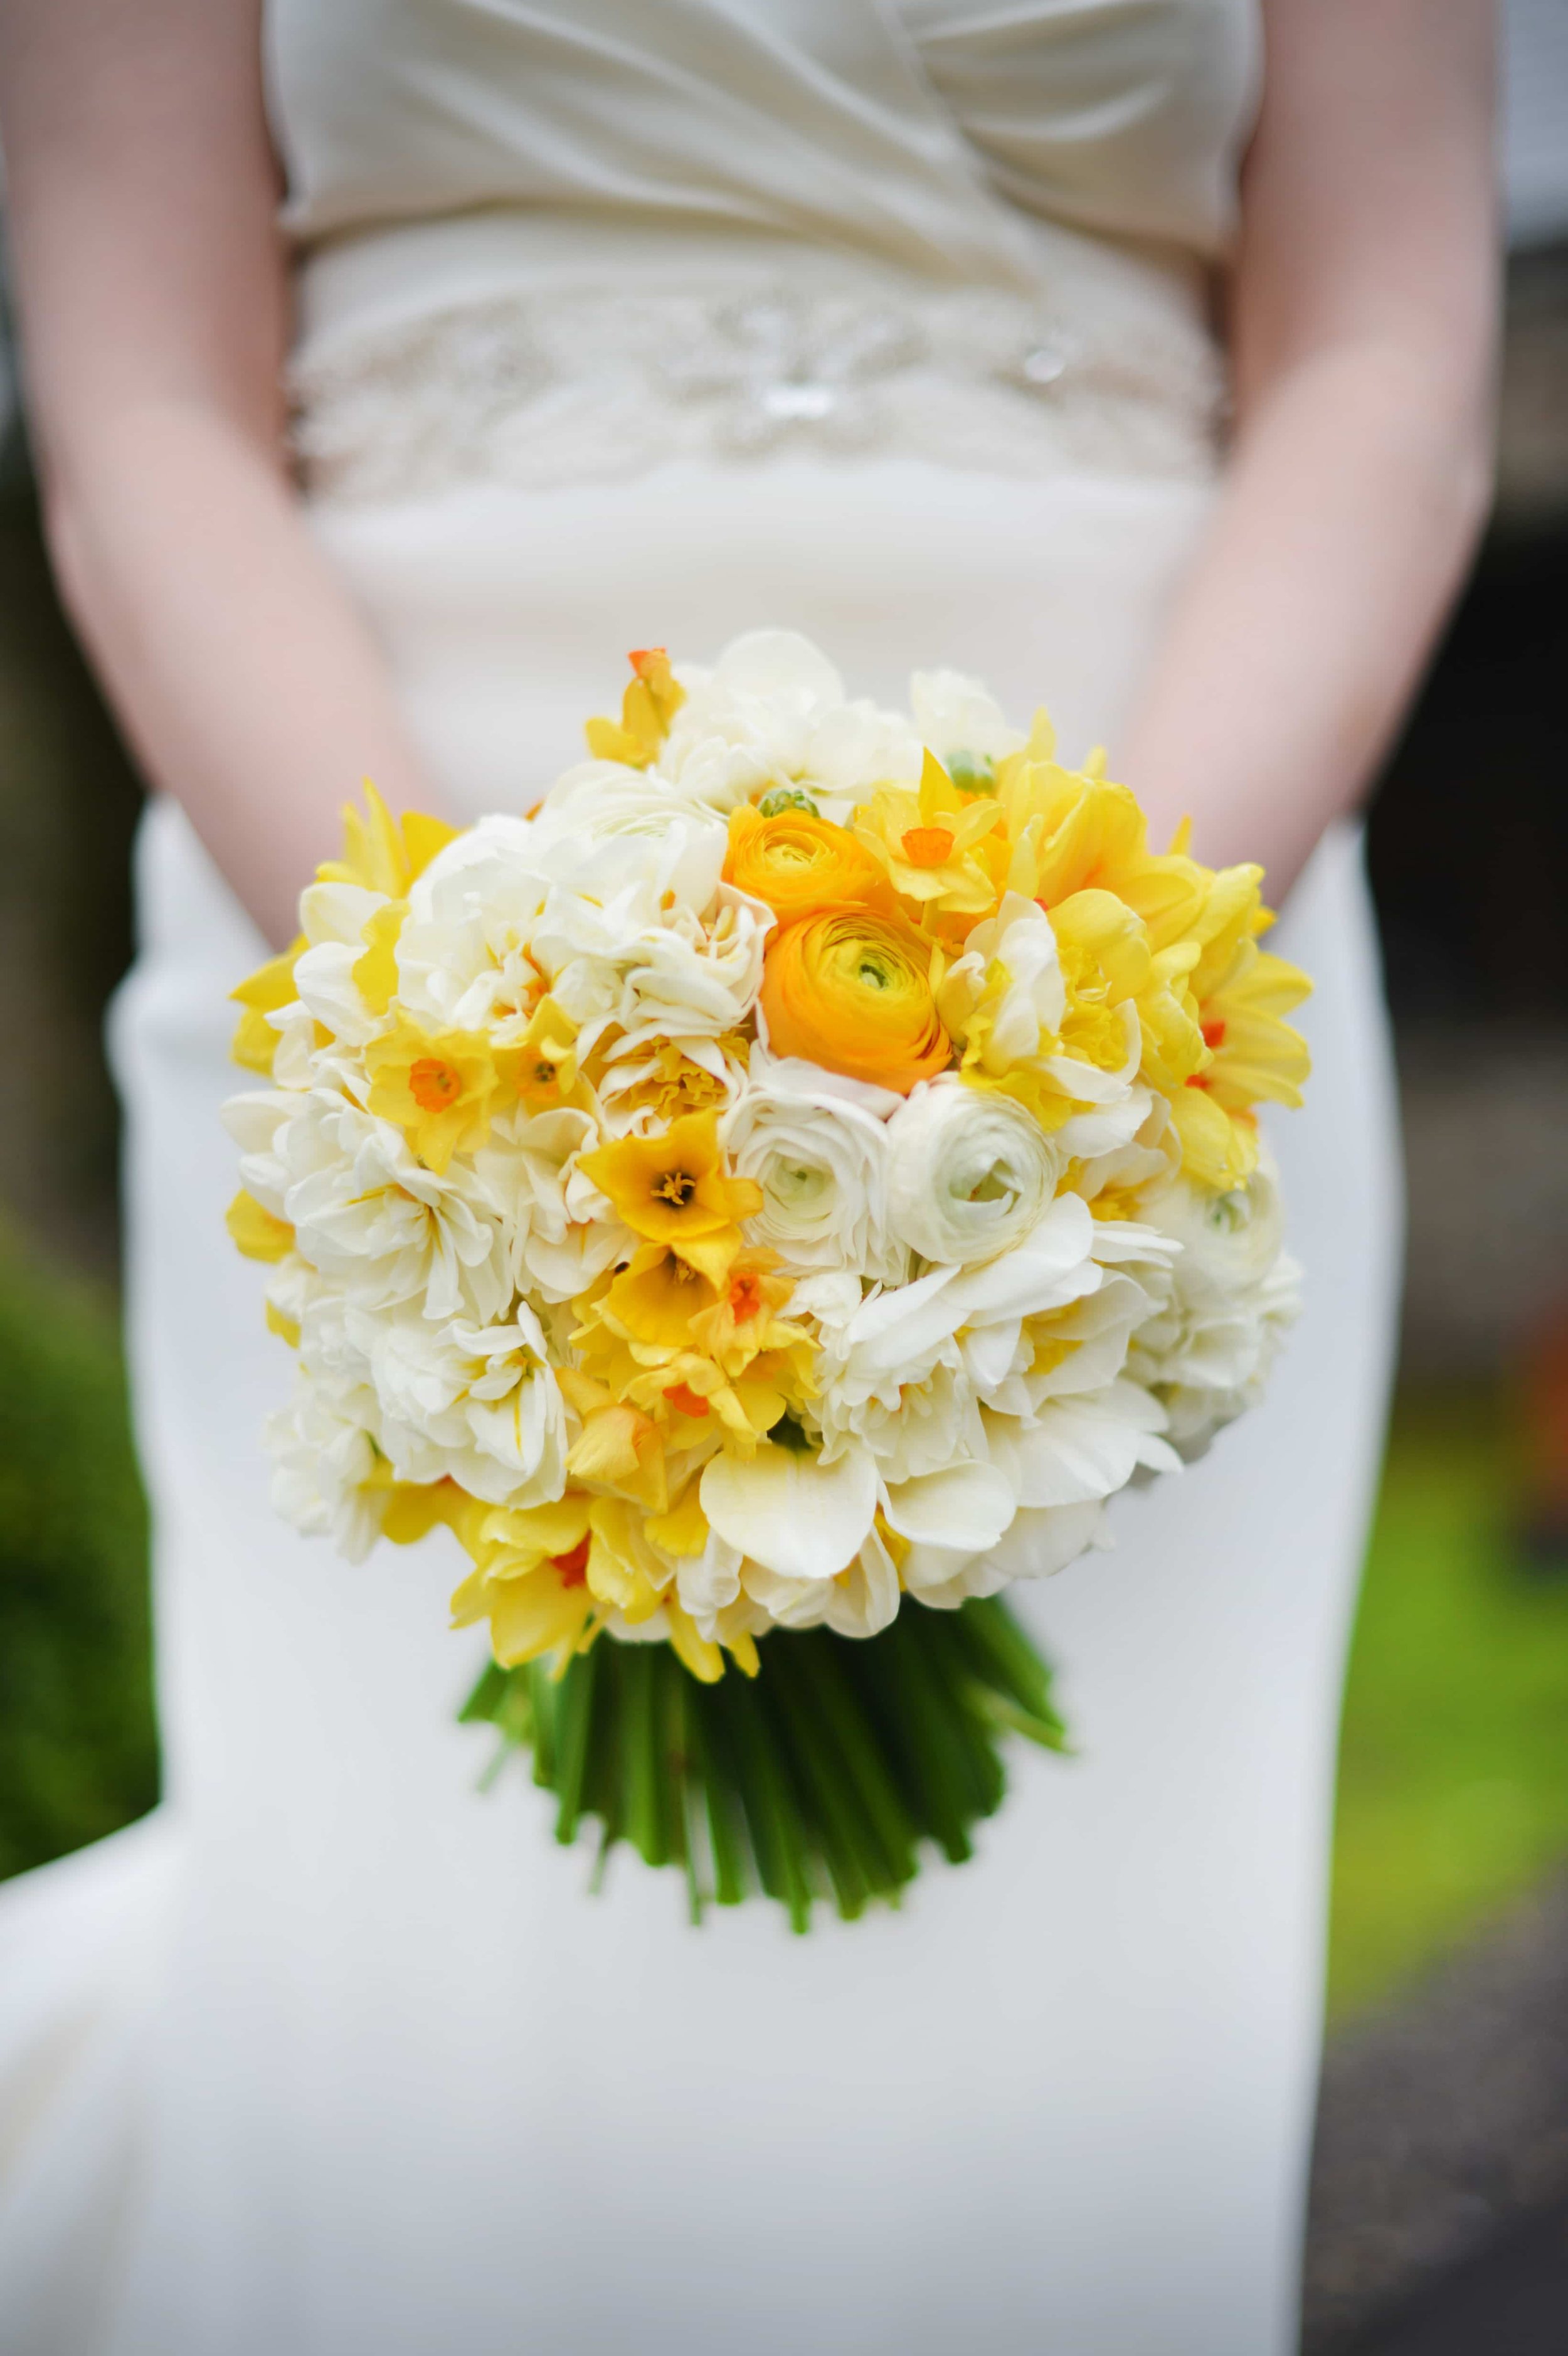 Spring bouquet with yellow and white daffodils and ranunculus.